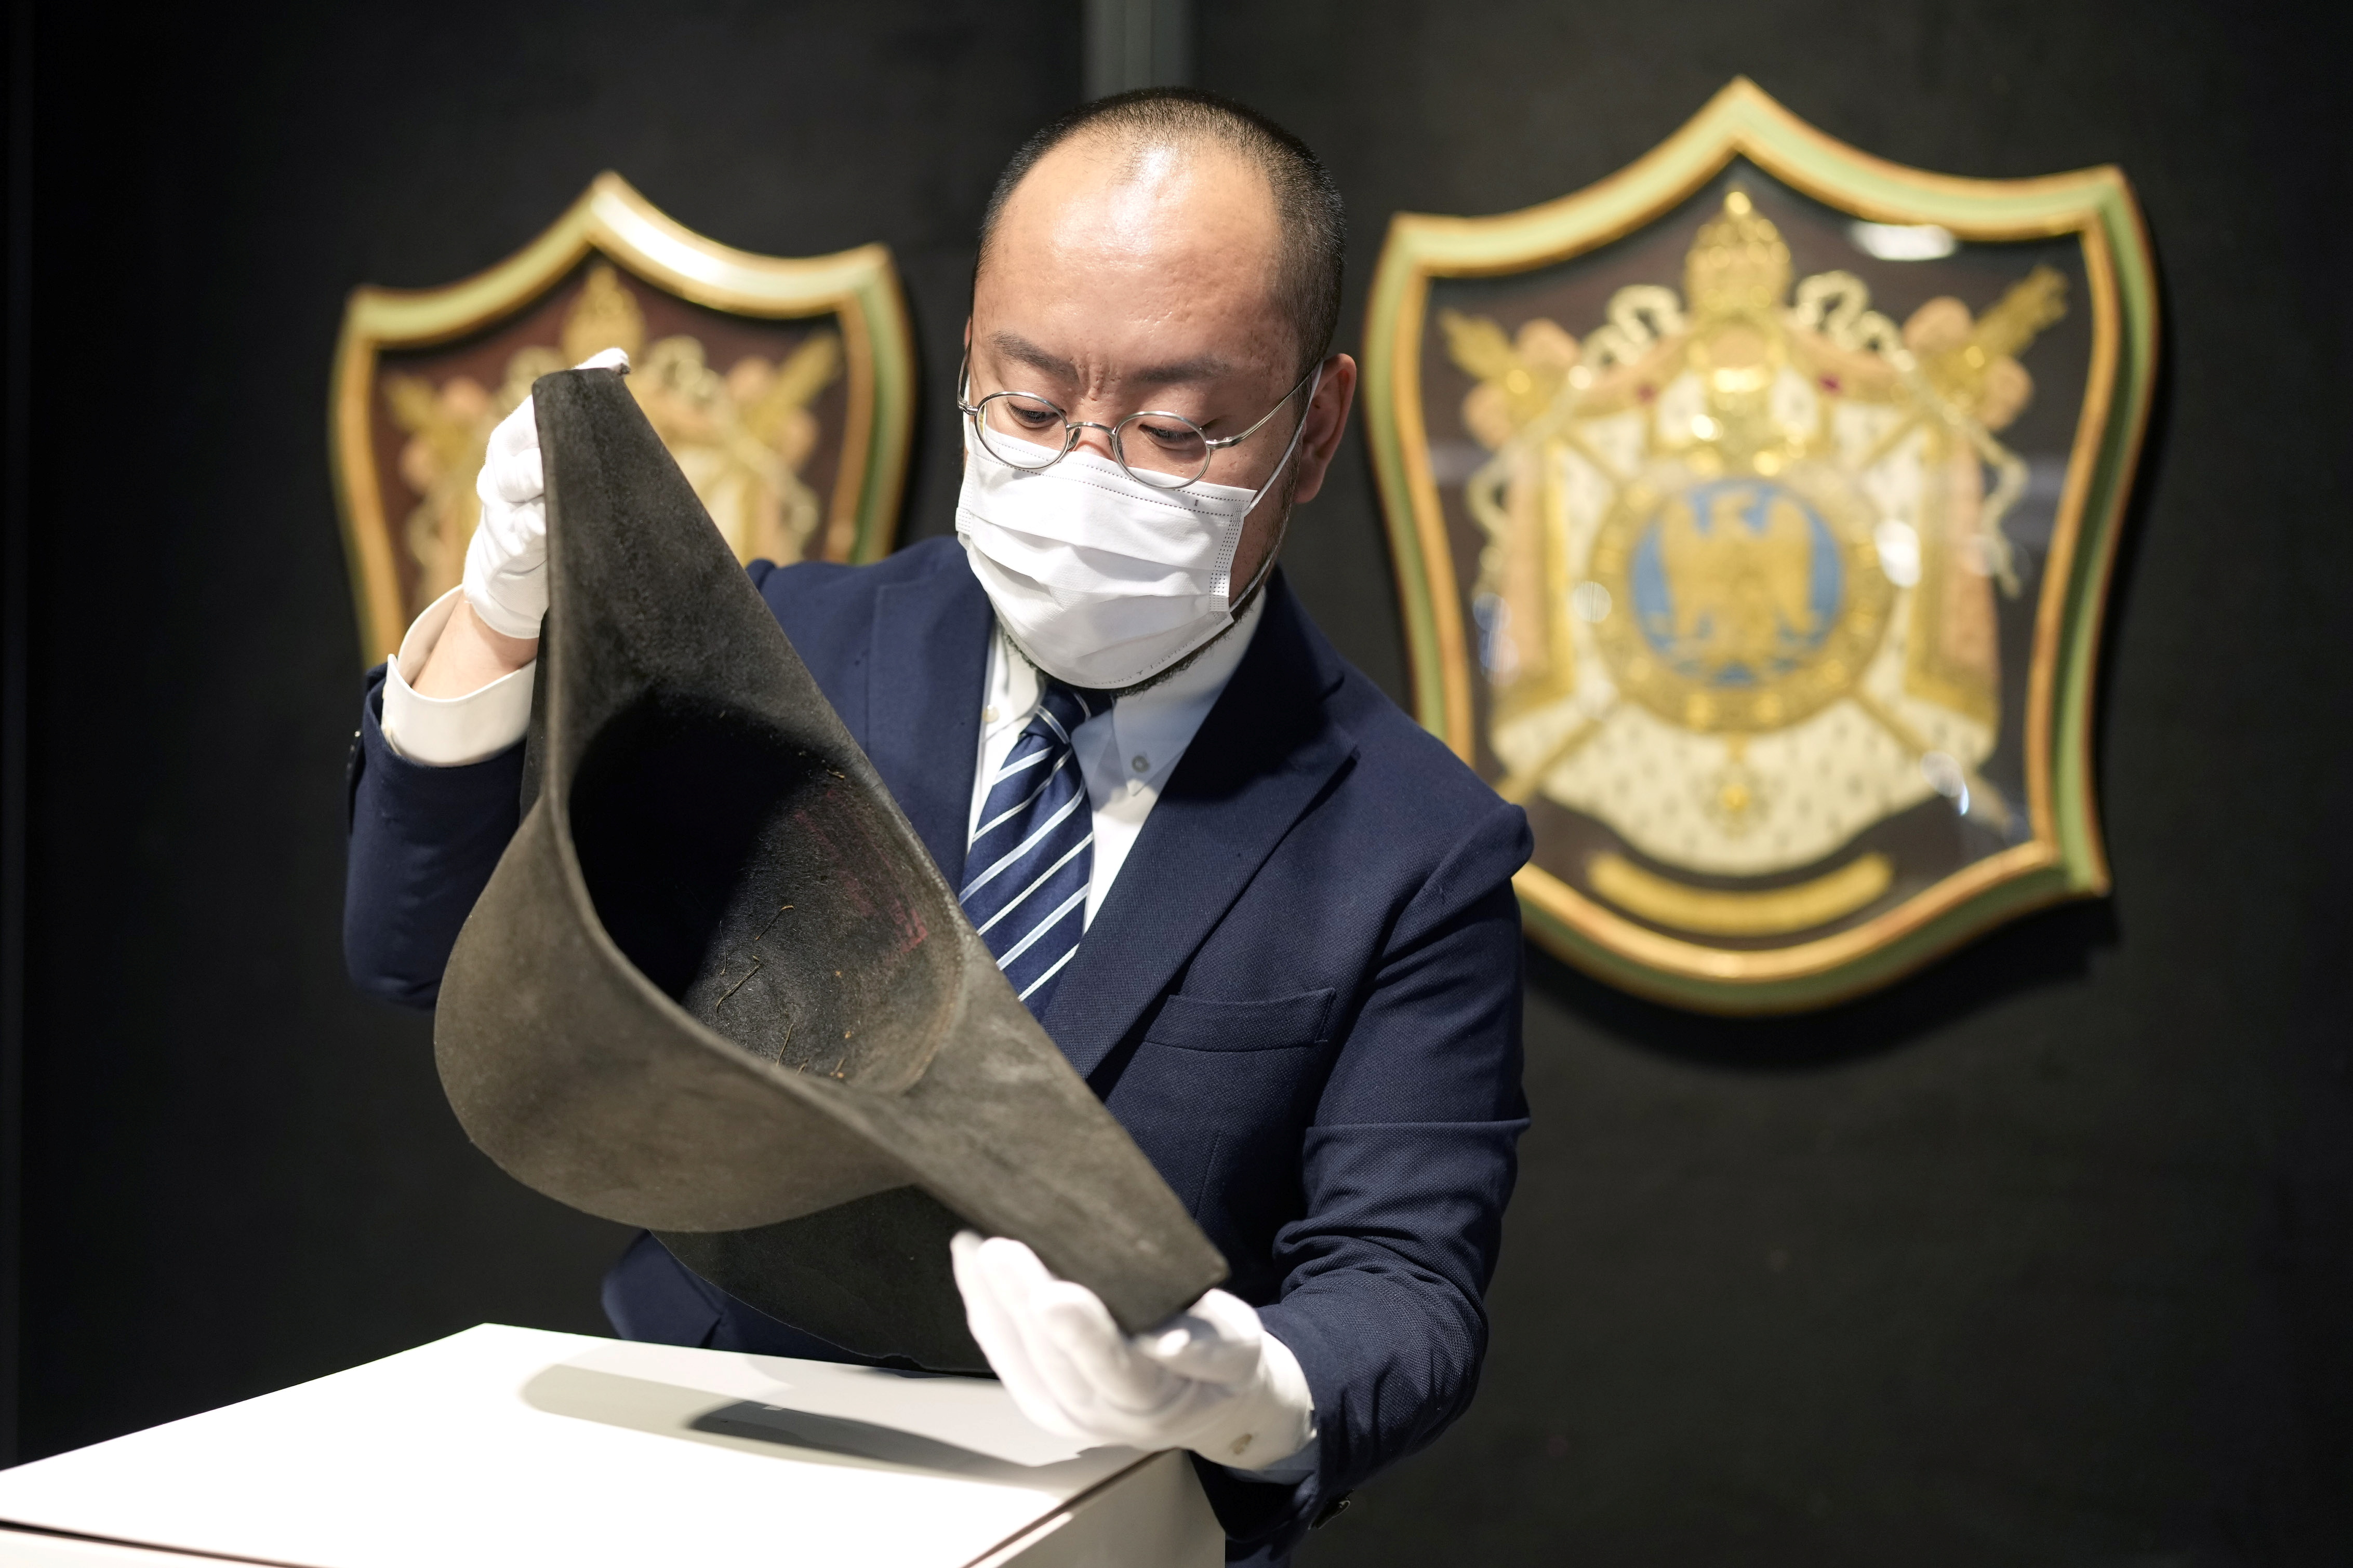 Bicorne hat which belonged to late French Emperor Napoleon Bonaparte is displayed ahead of an auction at Bonhams in Hong Kong